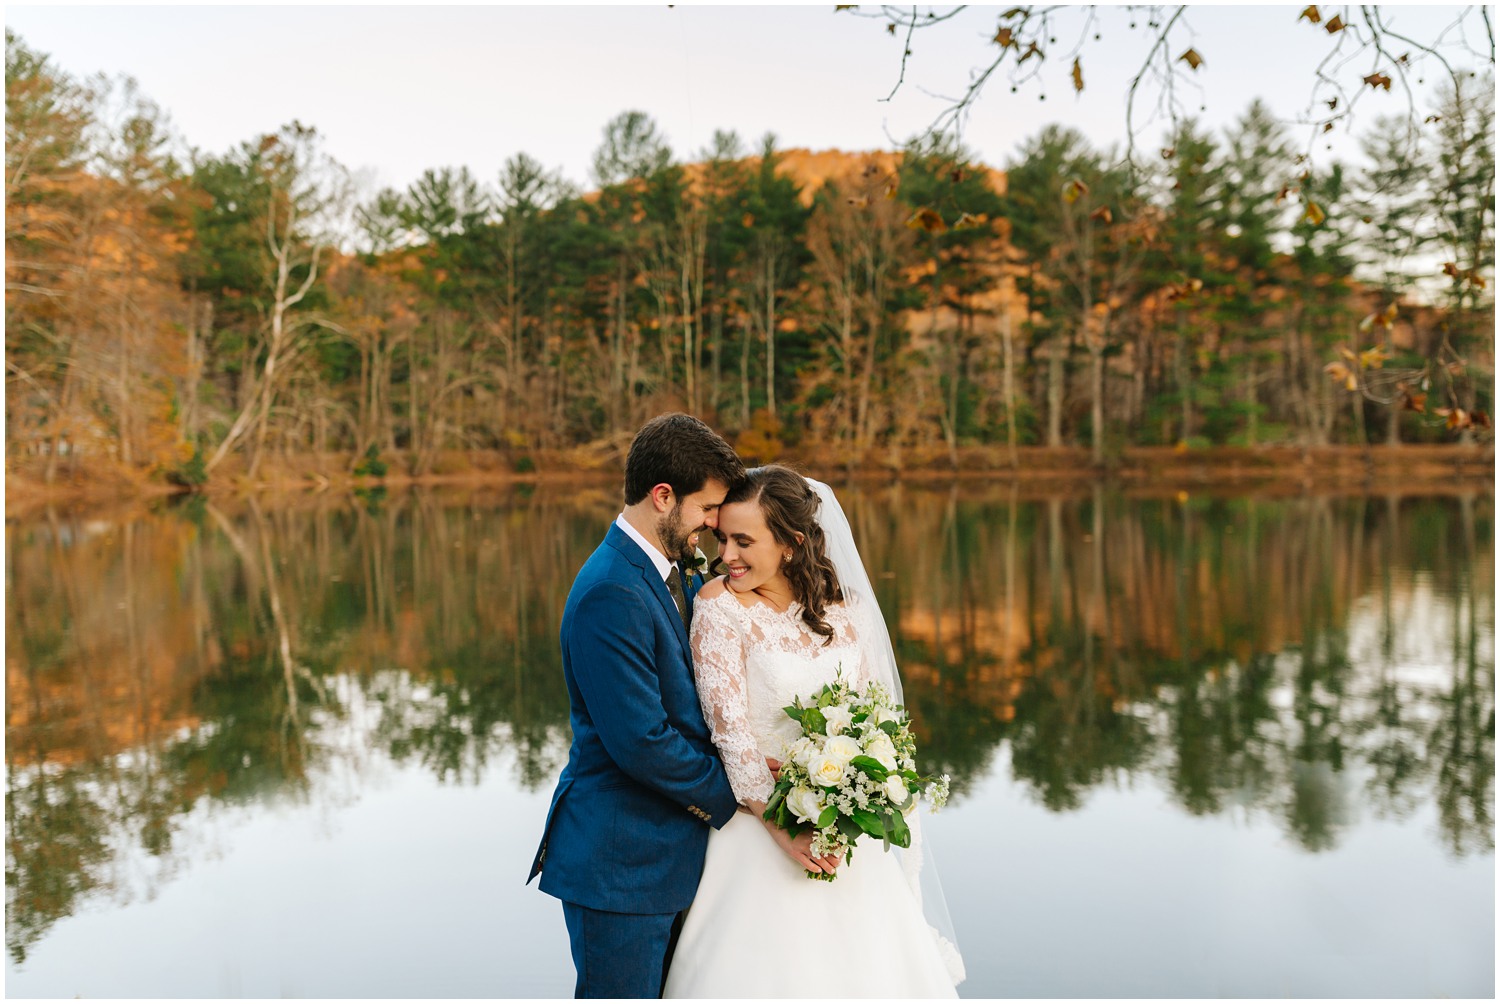 Lake Eden Events with bride holding all white bouquet while wearing veil and groom in navy suit